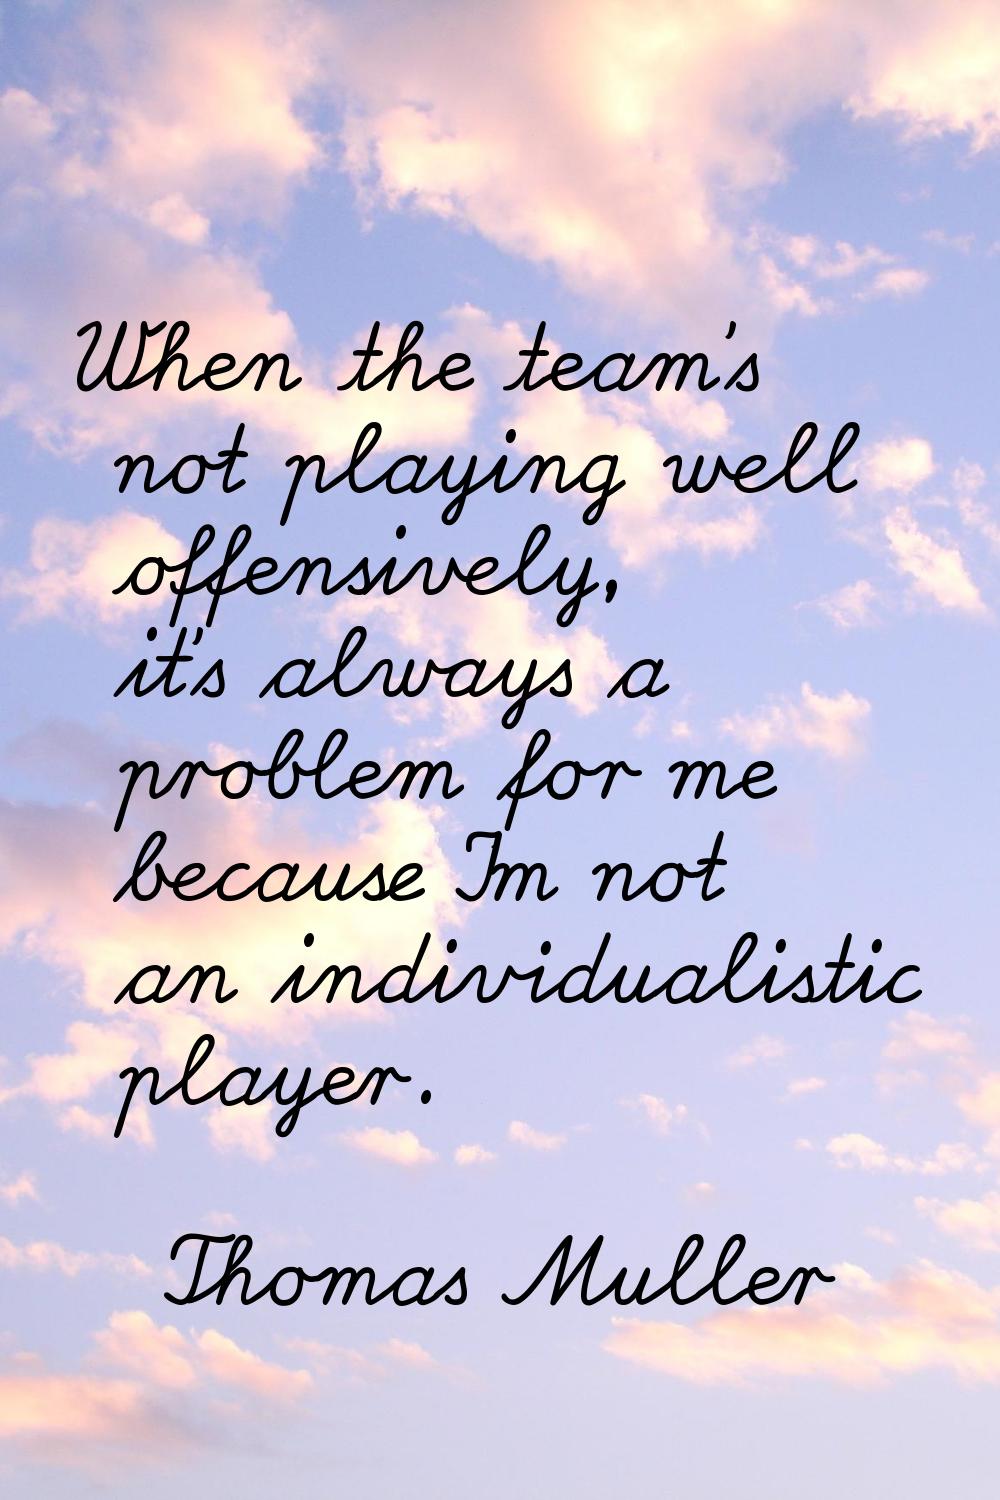 When the team's not playing well offensively, it's always a problem for me because I'm not an indiv